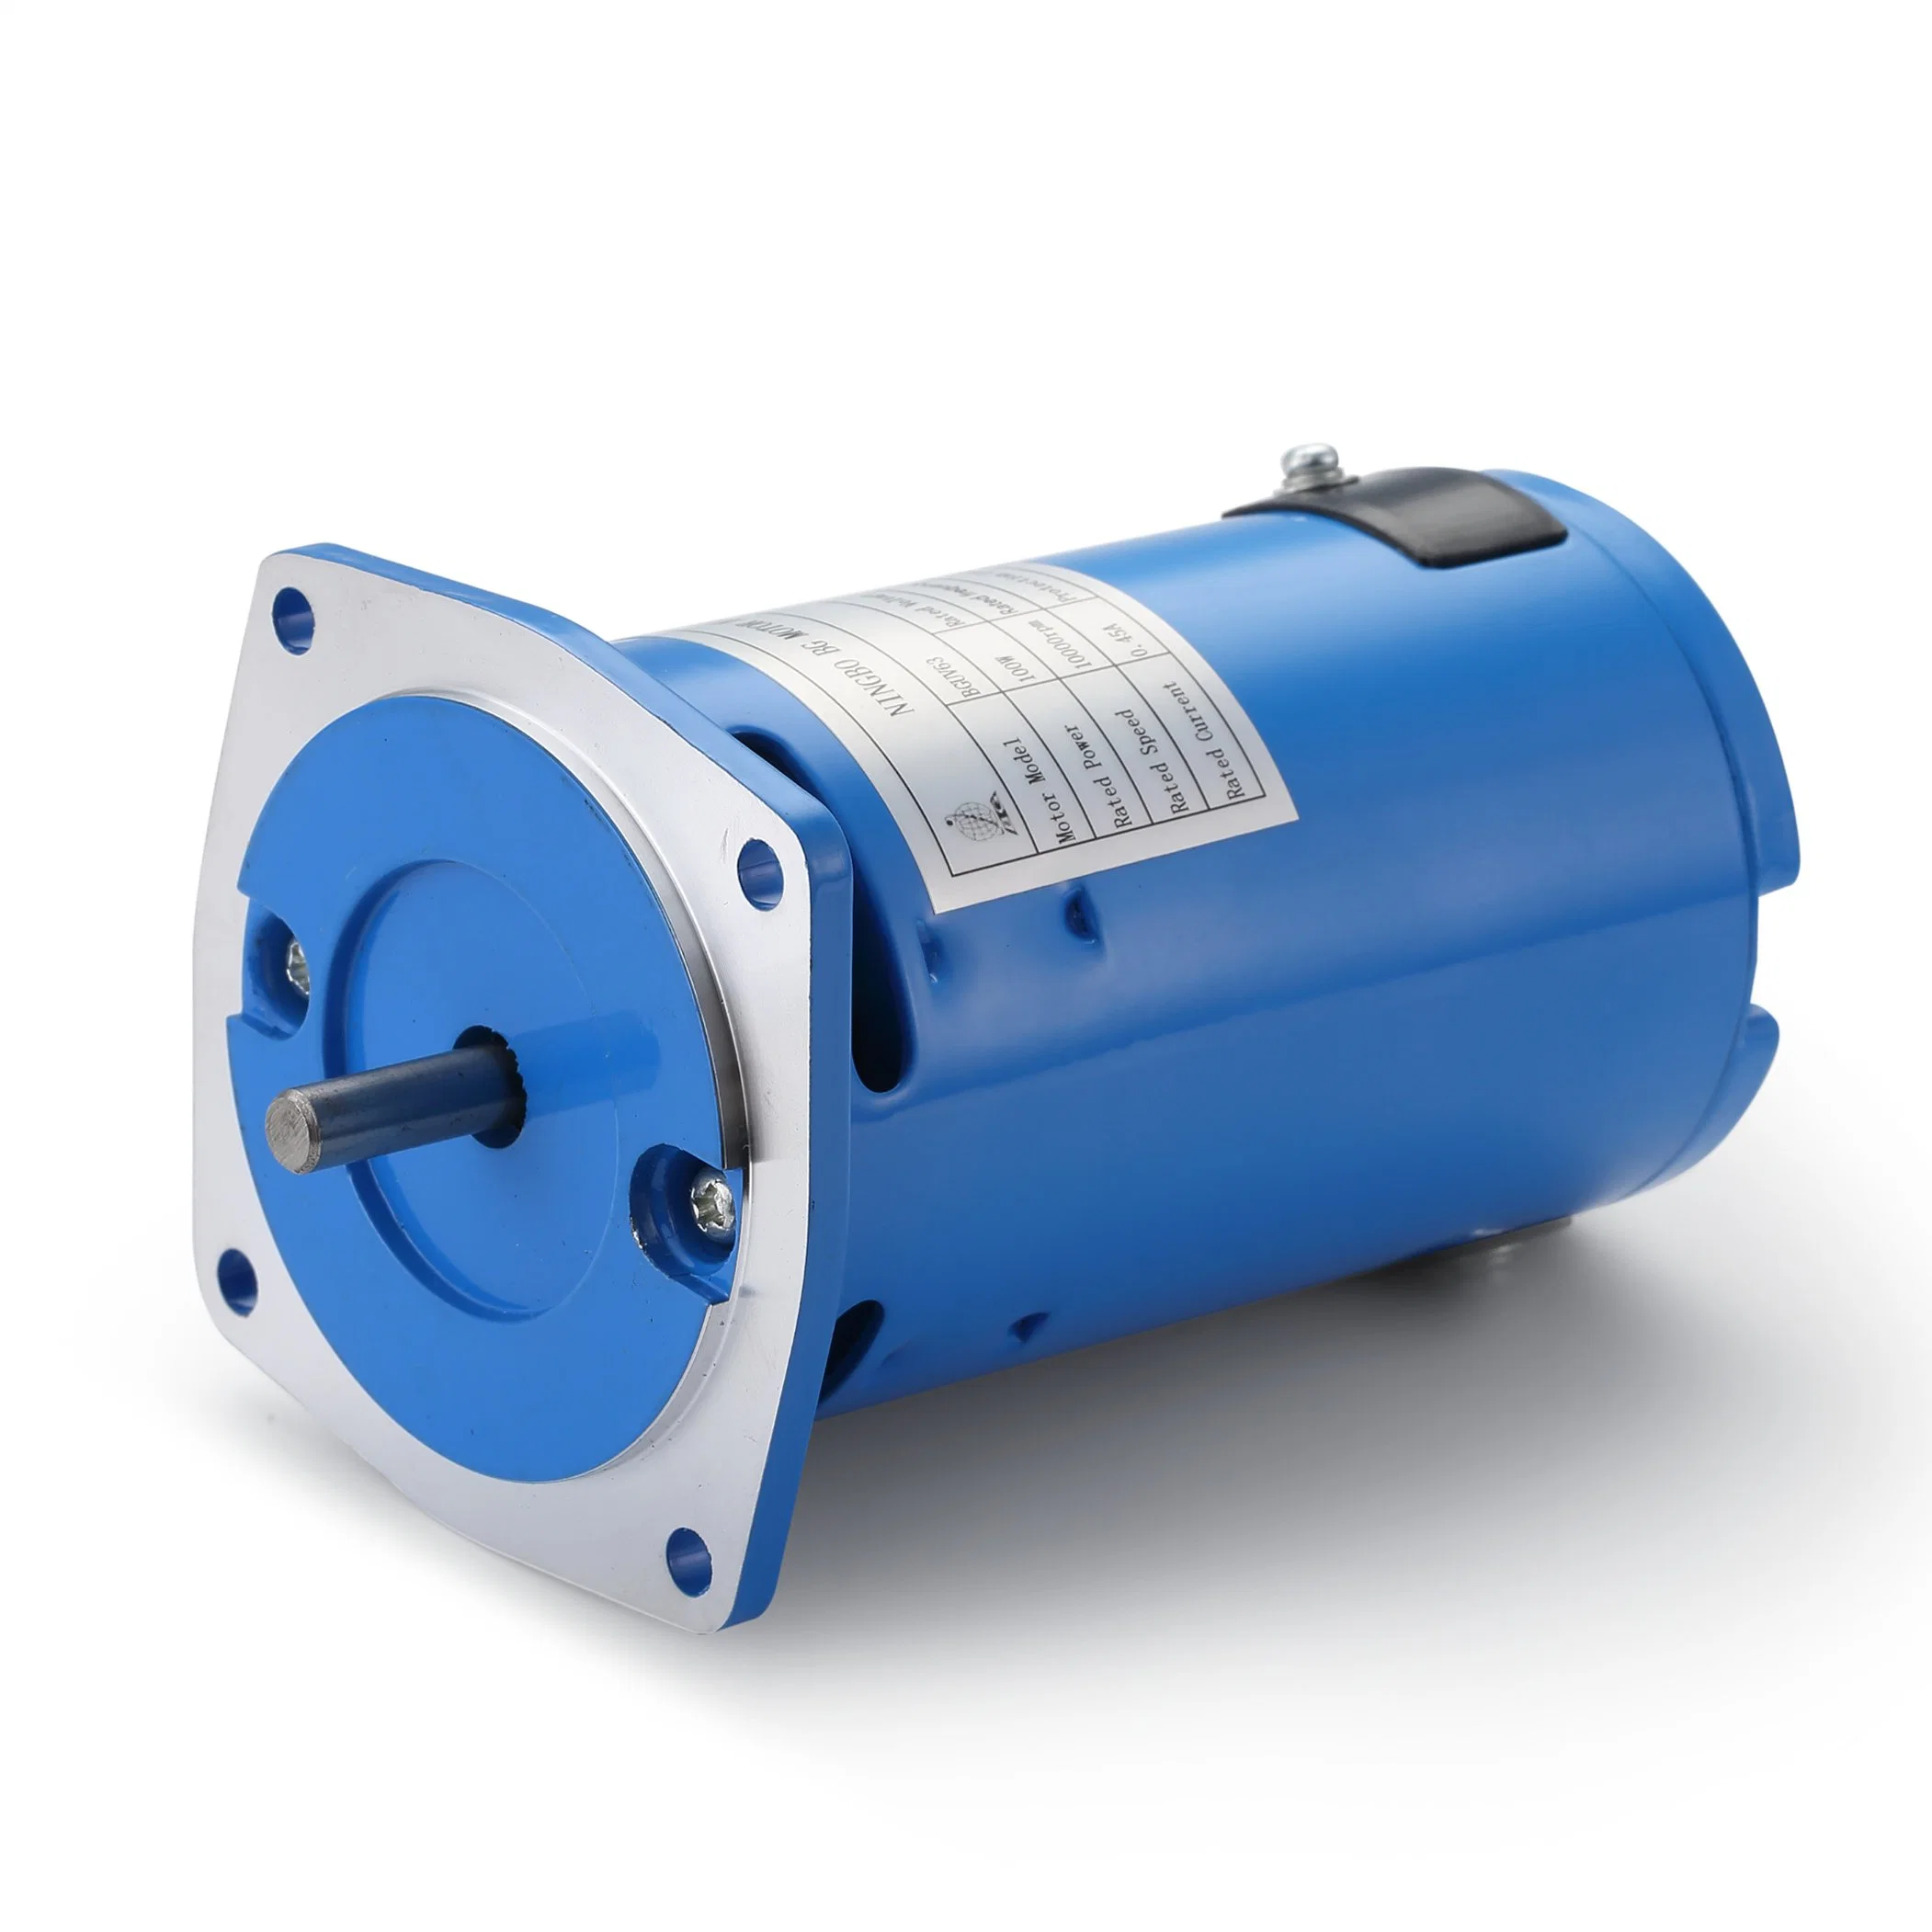 Universal Use AC 65 Motor Electric 110/220V Speed Control High quality/High cost performance  Multi-Function Motor